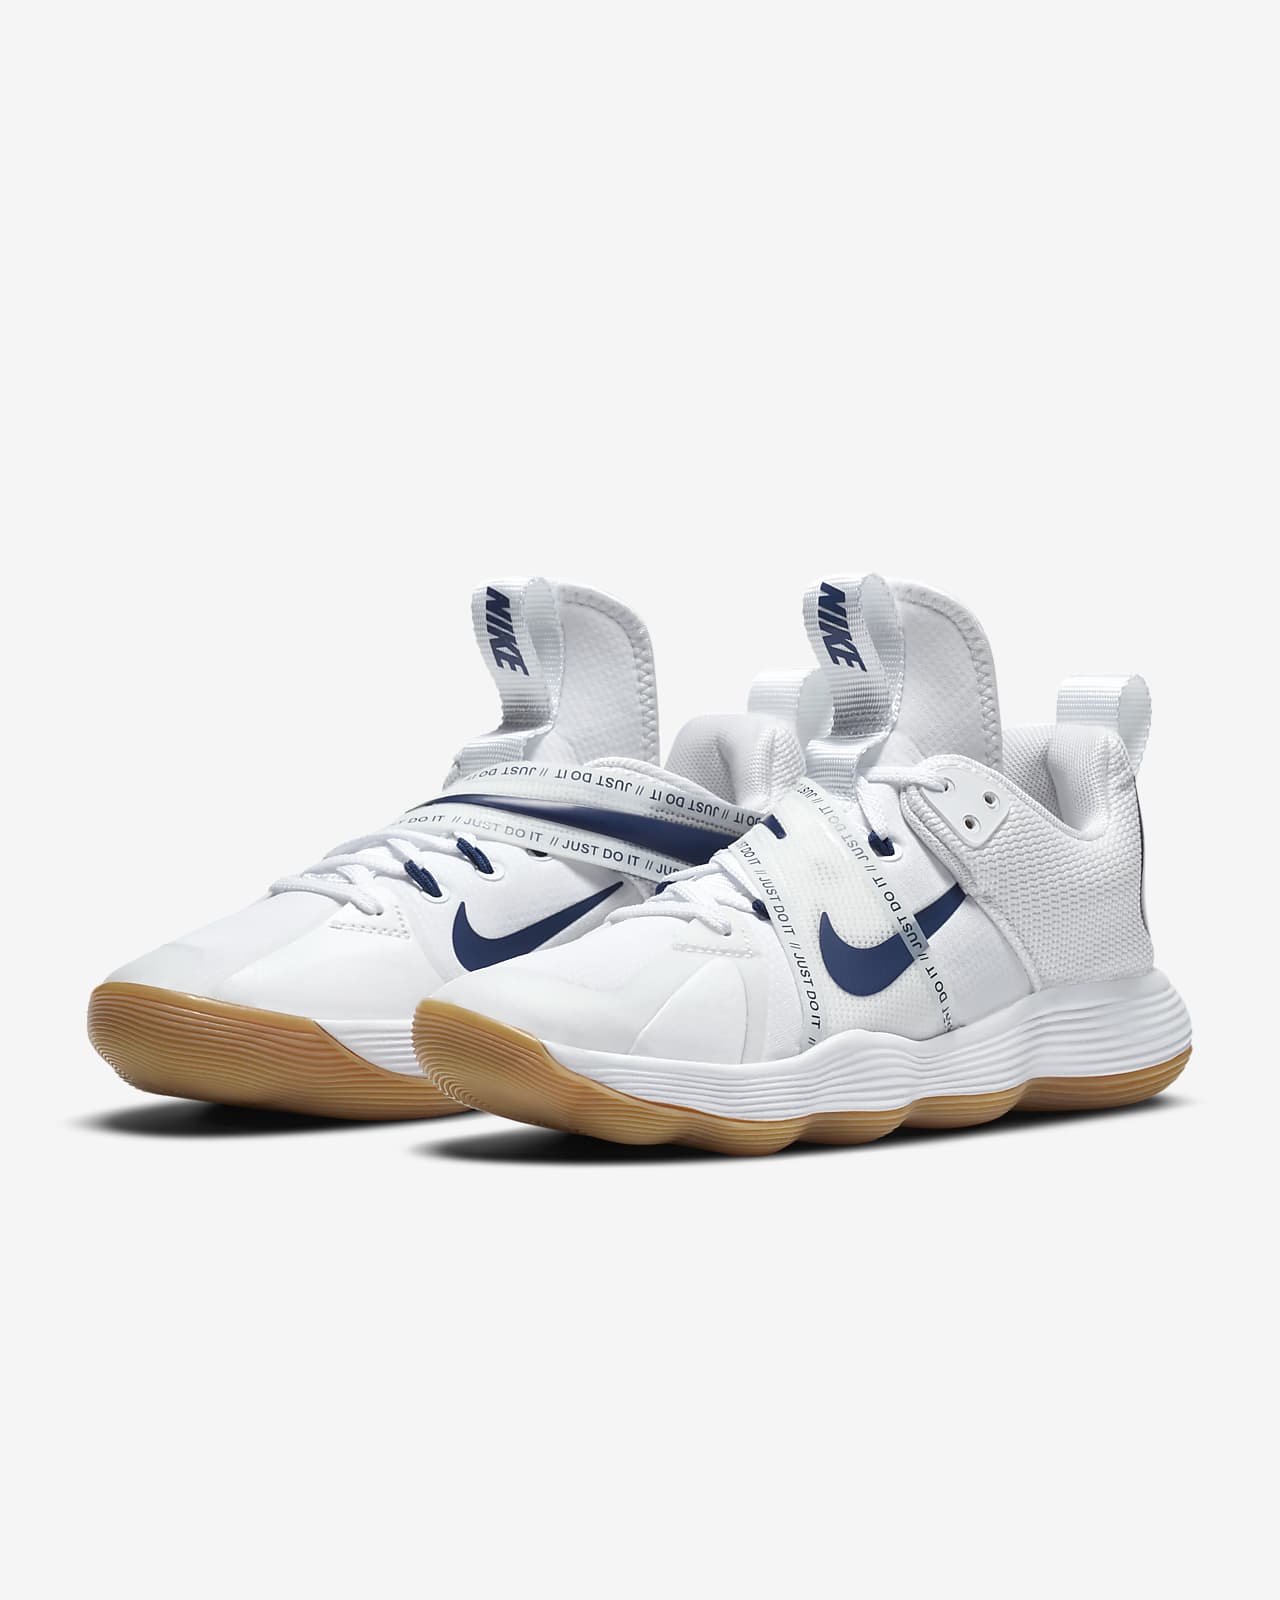 womens white nike volleyball shoes